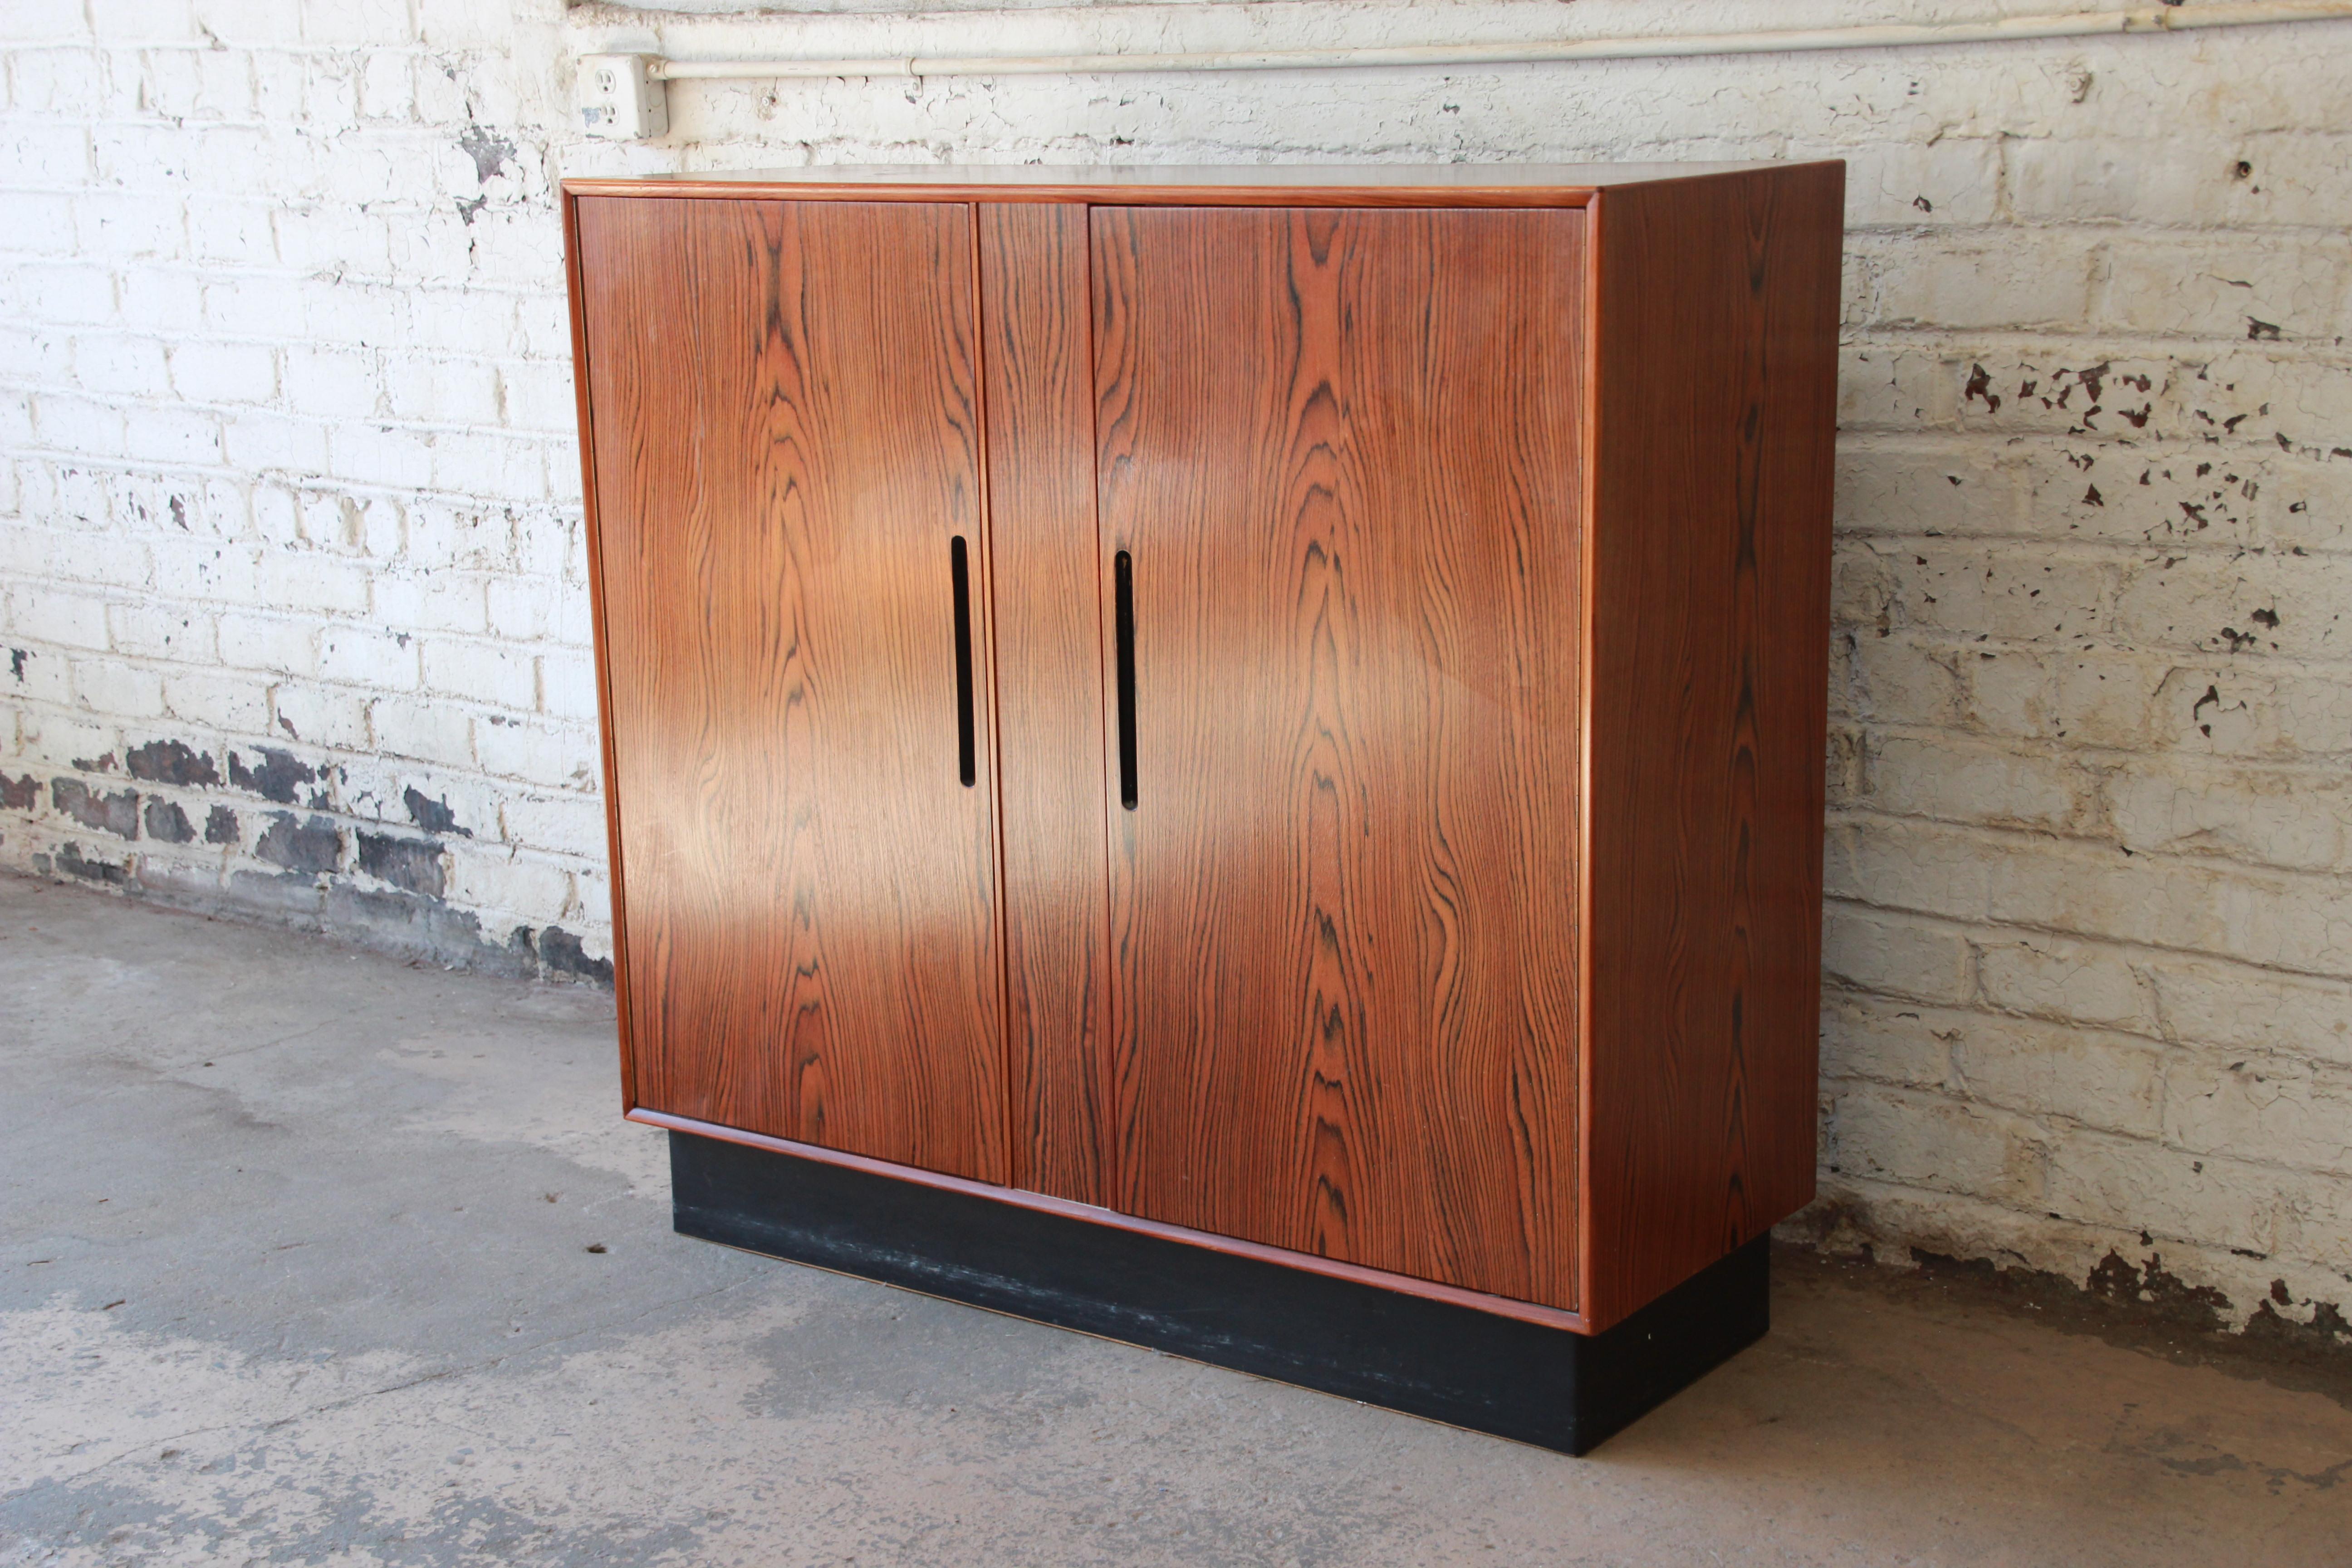 A gorgeous Scandinavian Modern rosewood gentleman's chest or dresser by Westnofa. The chest features stunning wood grain and sleek Scandinavian design. It offers ample room for storage, with six dovetailed drawers behind the left door and three